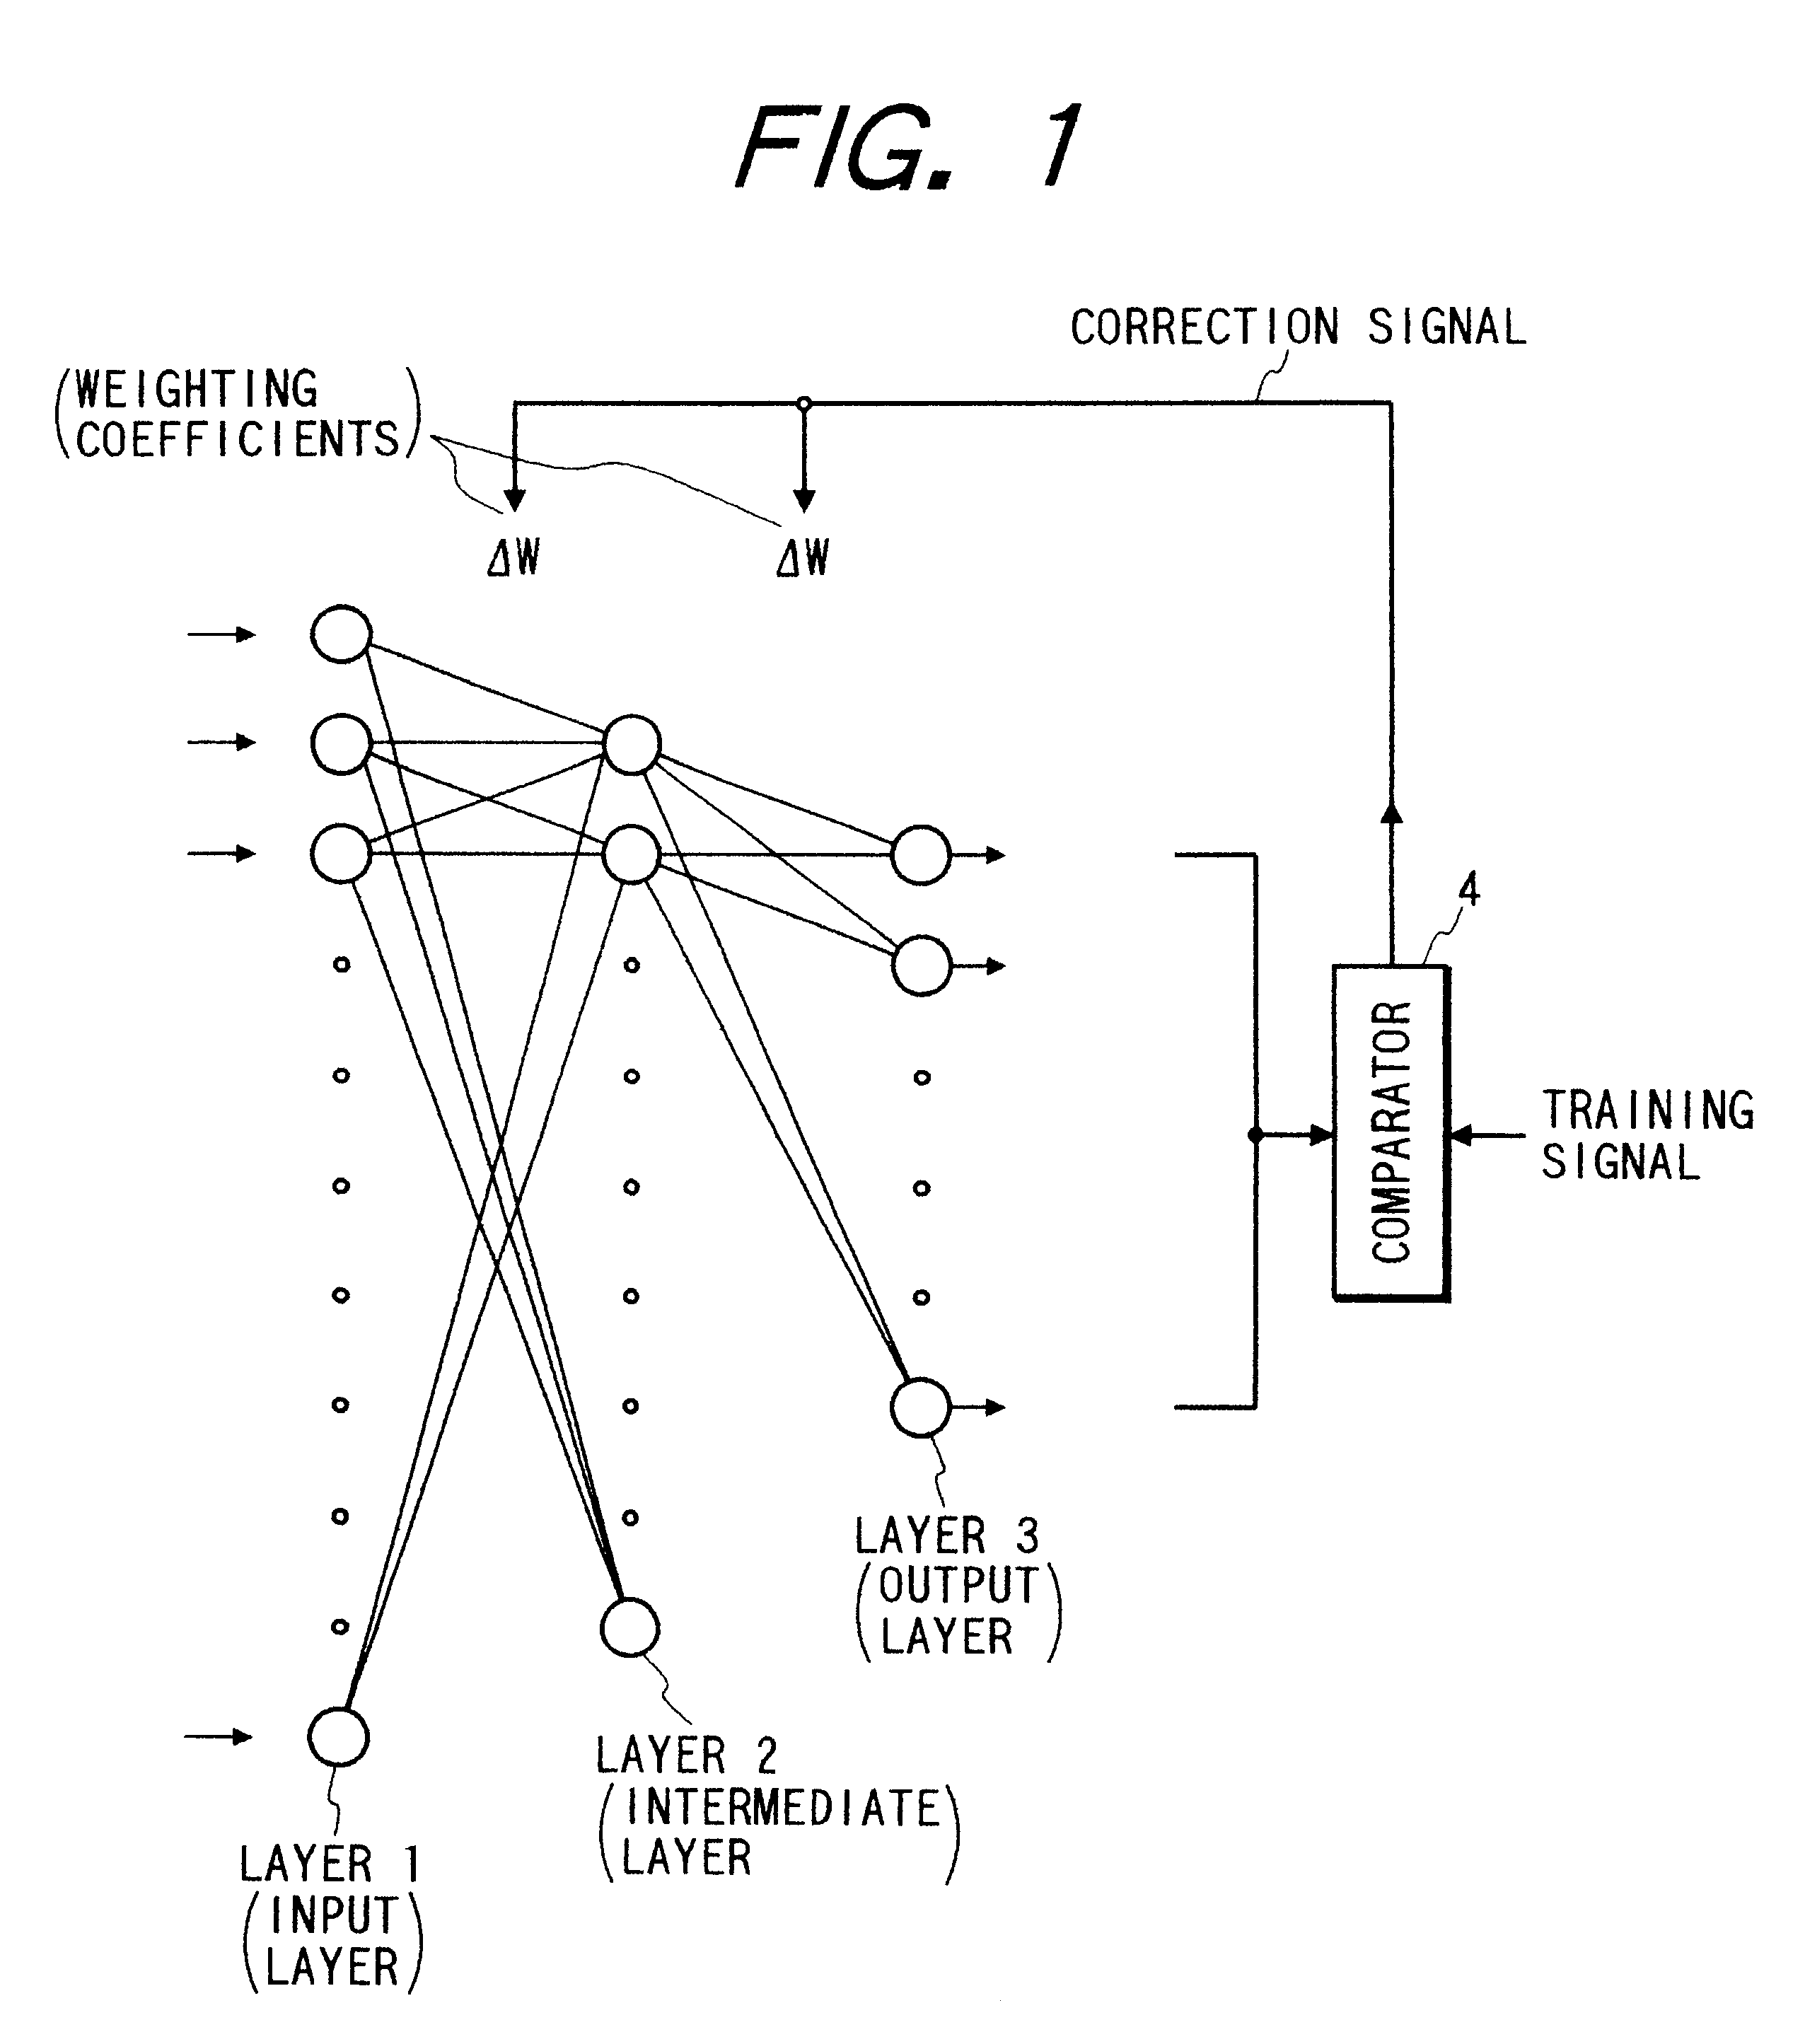 Neurofilter, and method of training same to operate on image data such as to discriminate between text and picture regions of an image which is expressed by image data